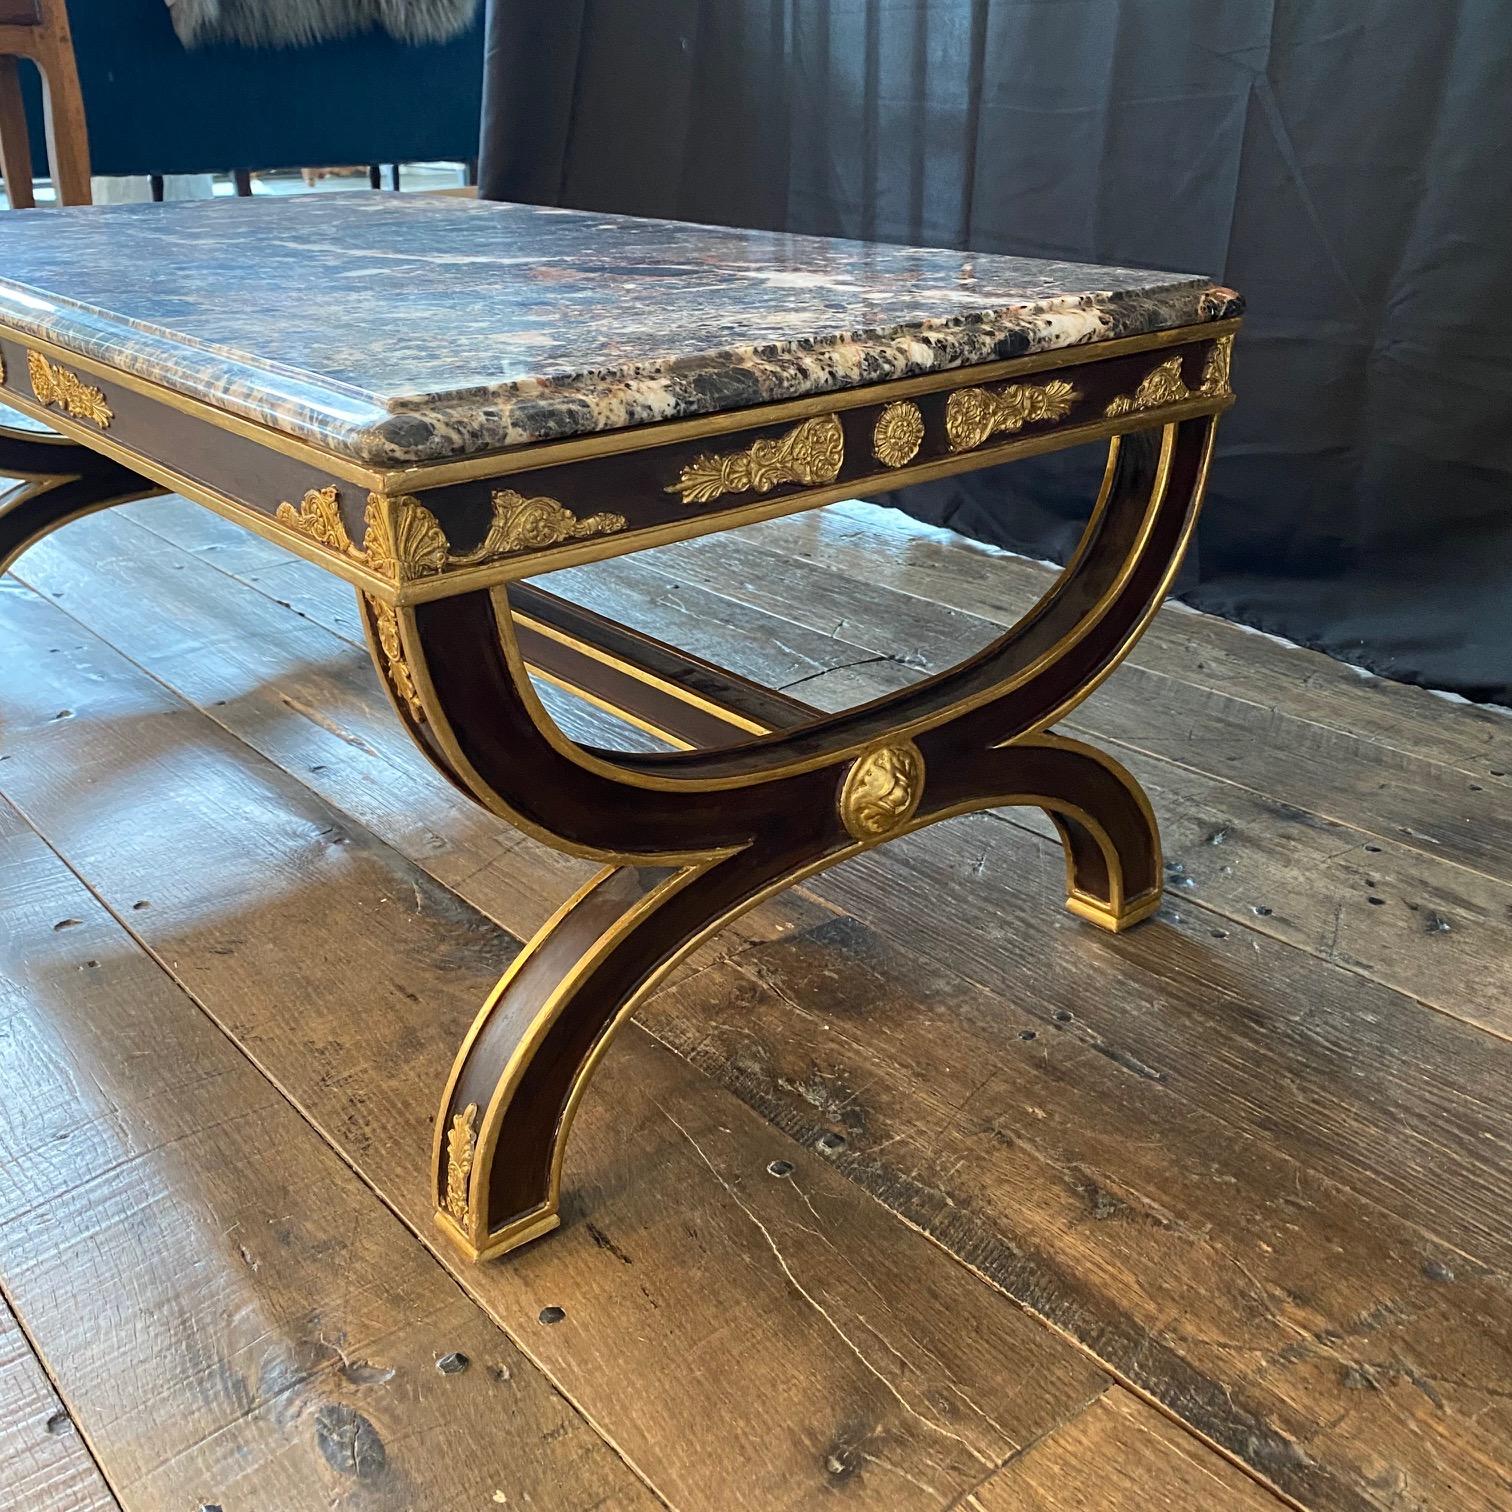 A beautiful and impressive antique French marble top coffee table having  ebony with gorgeous gilt mounts highlighting the lovely circular side stretchers pattern. The heavy rectangular marble top has wonderful color and patterns and sits loose on